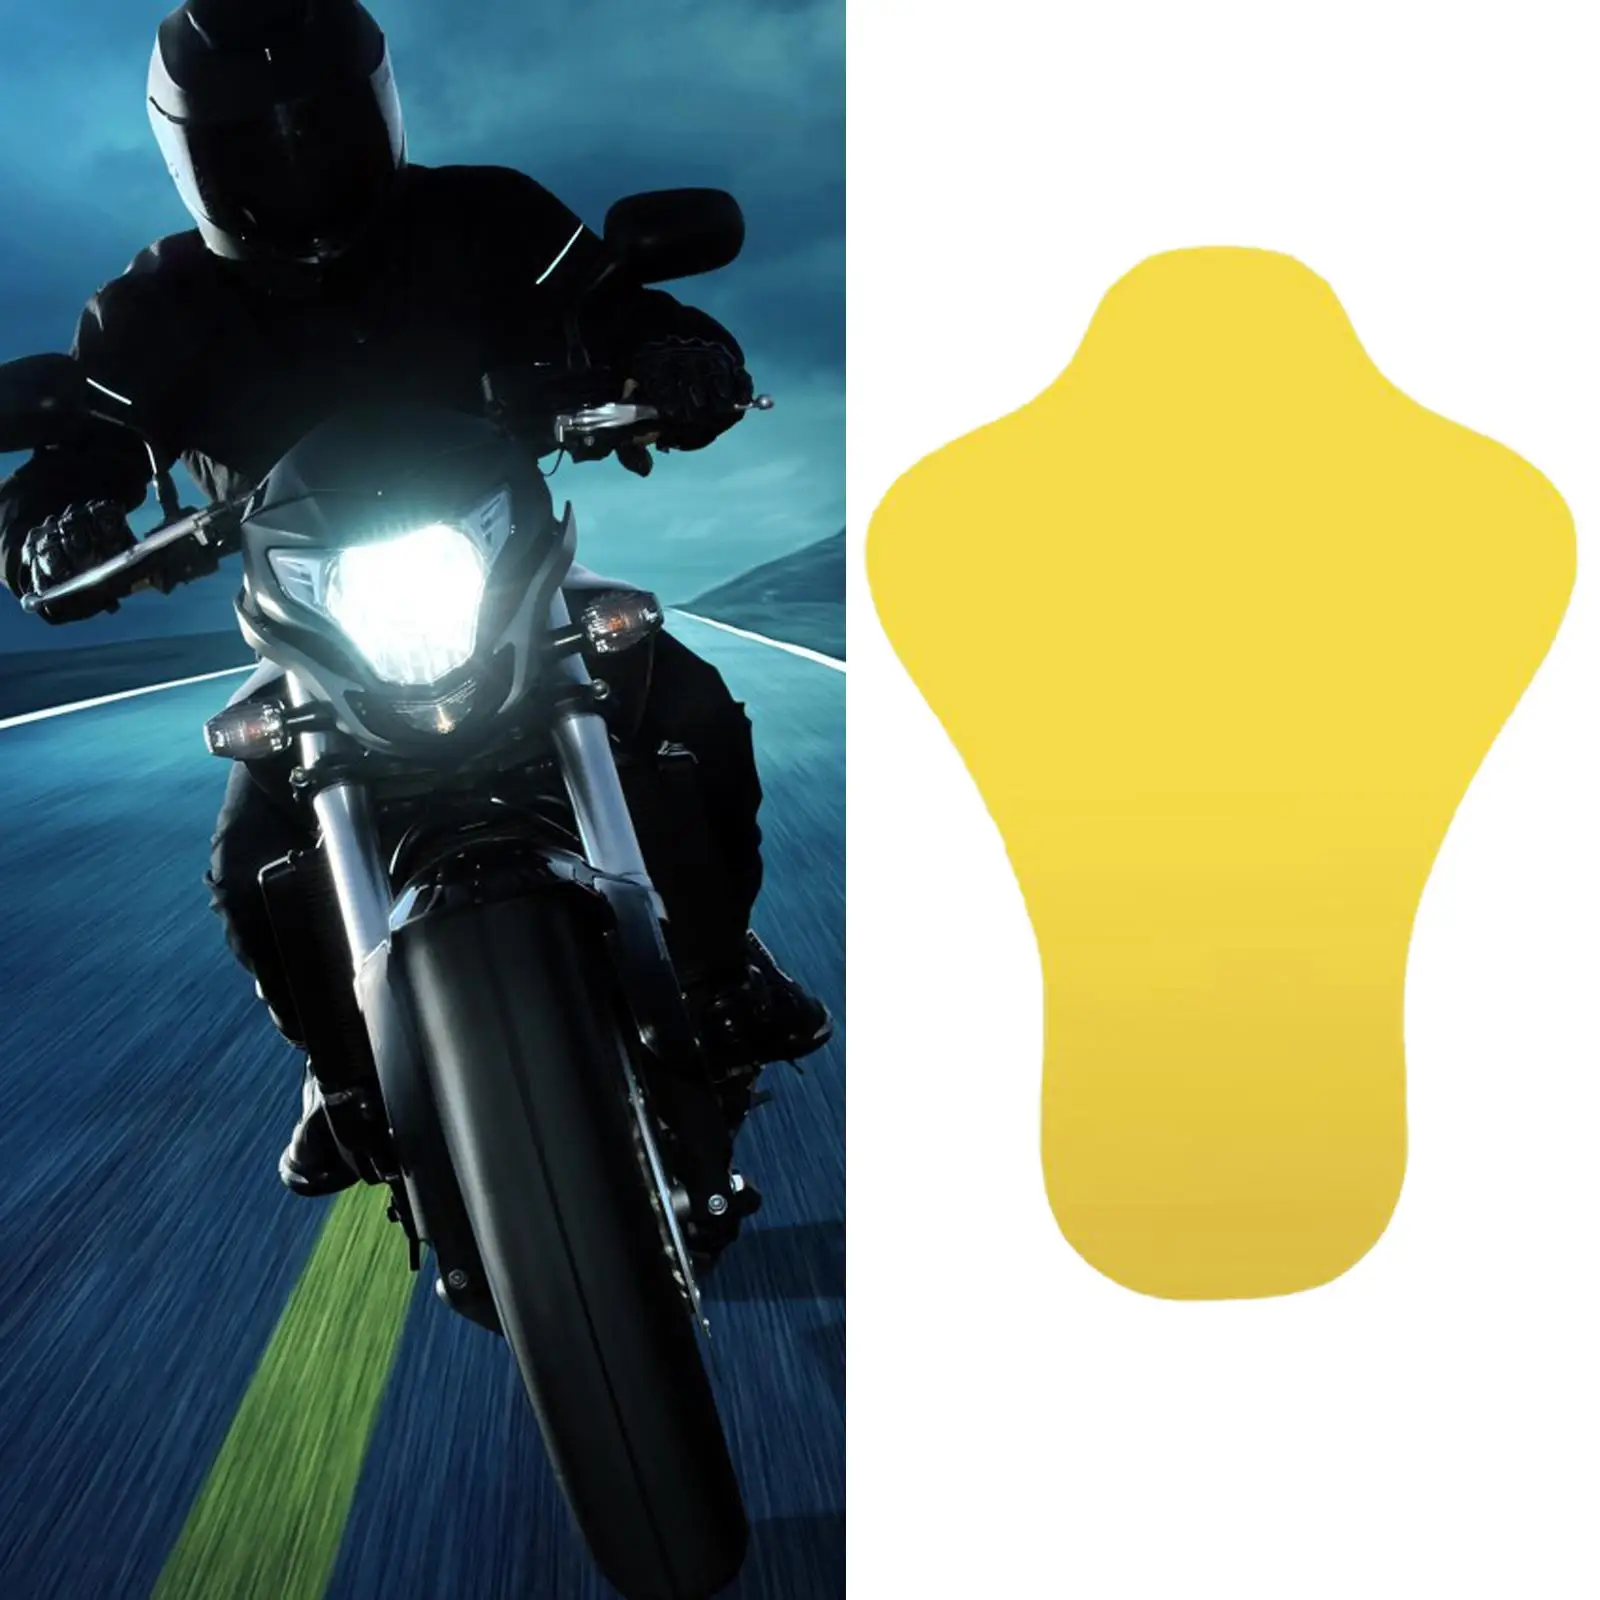 Motorcycle Back Guards Universal Lightweight Riding Safe Protective Inside Gear Motorcycle Protective for Outdoor Sport Fitments